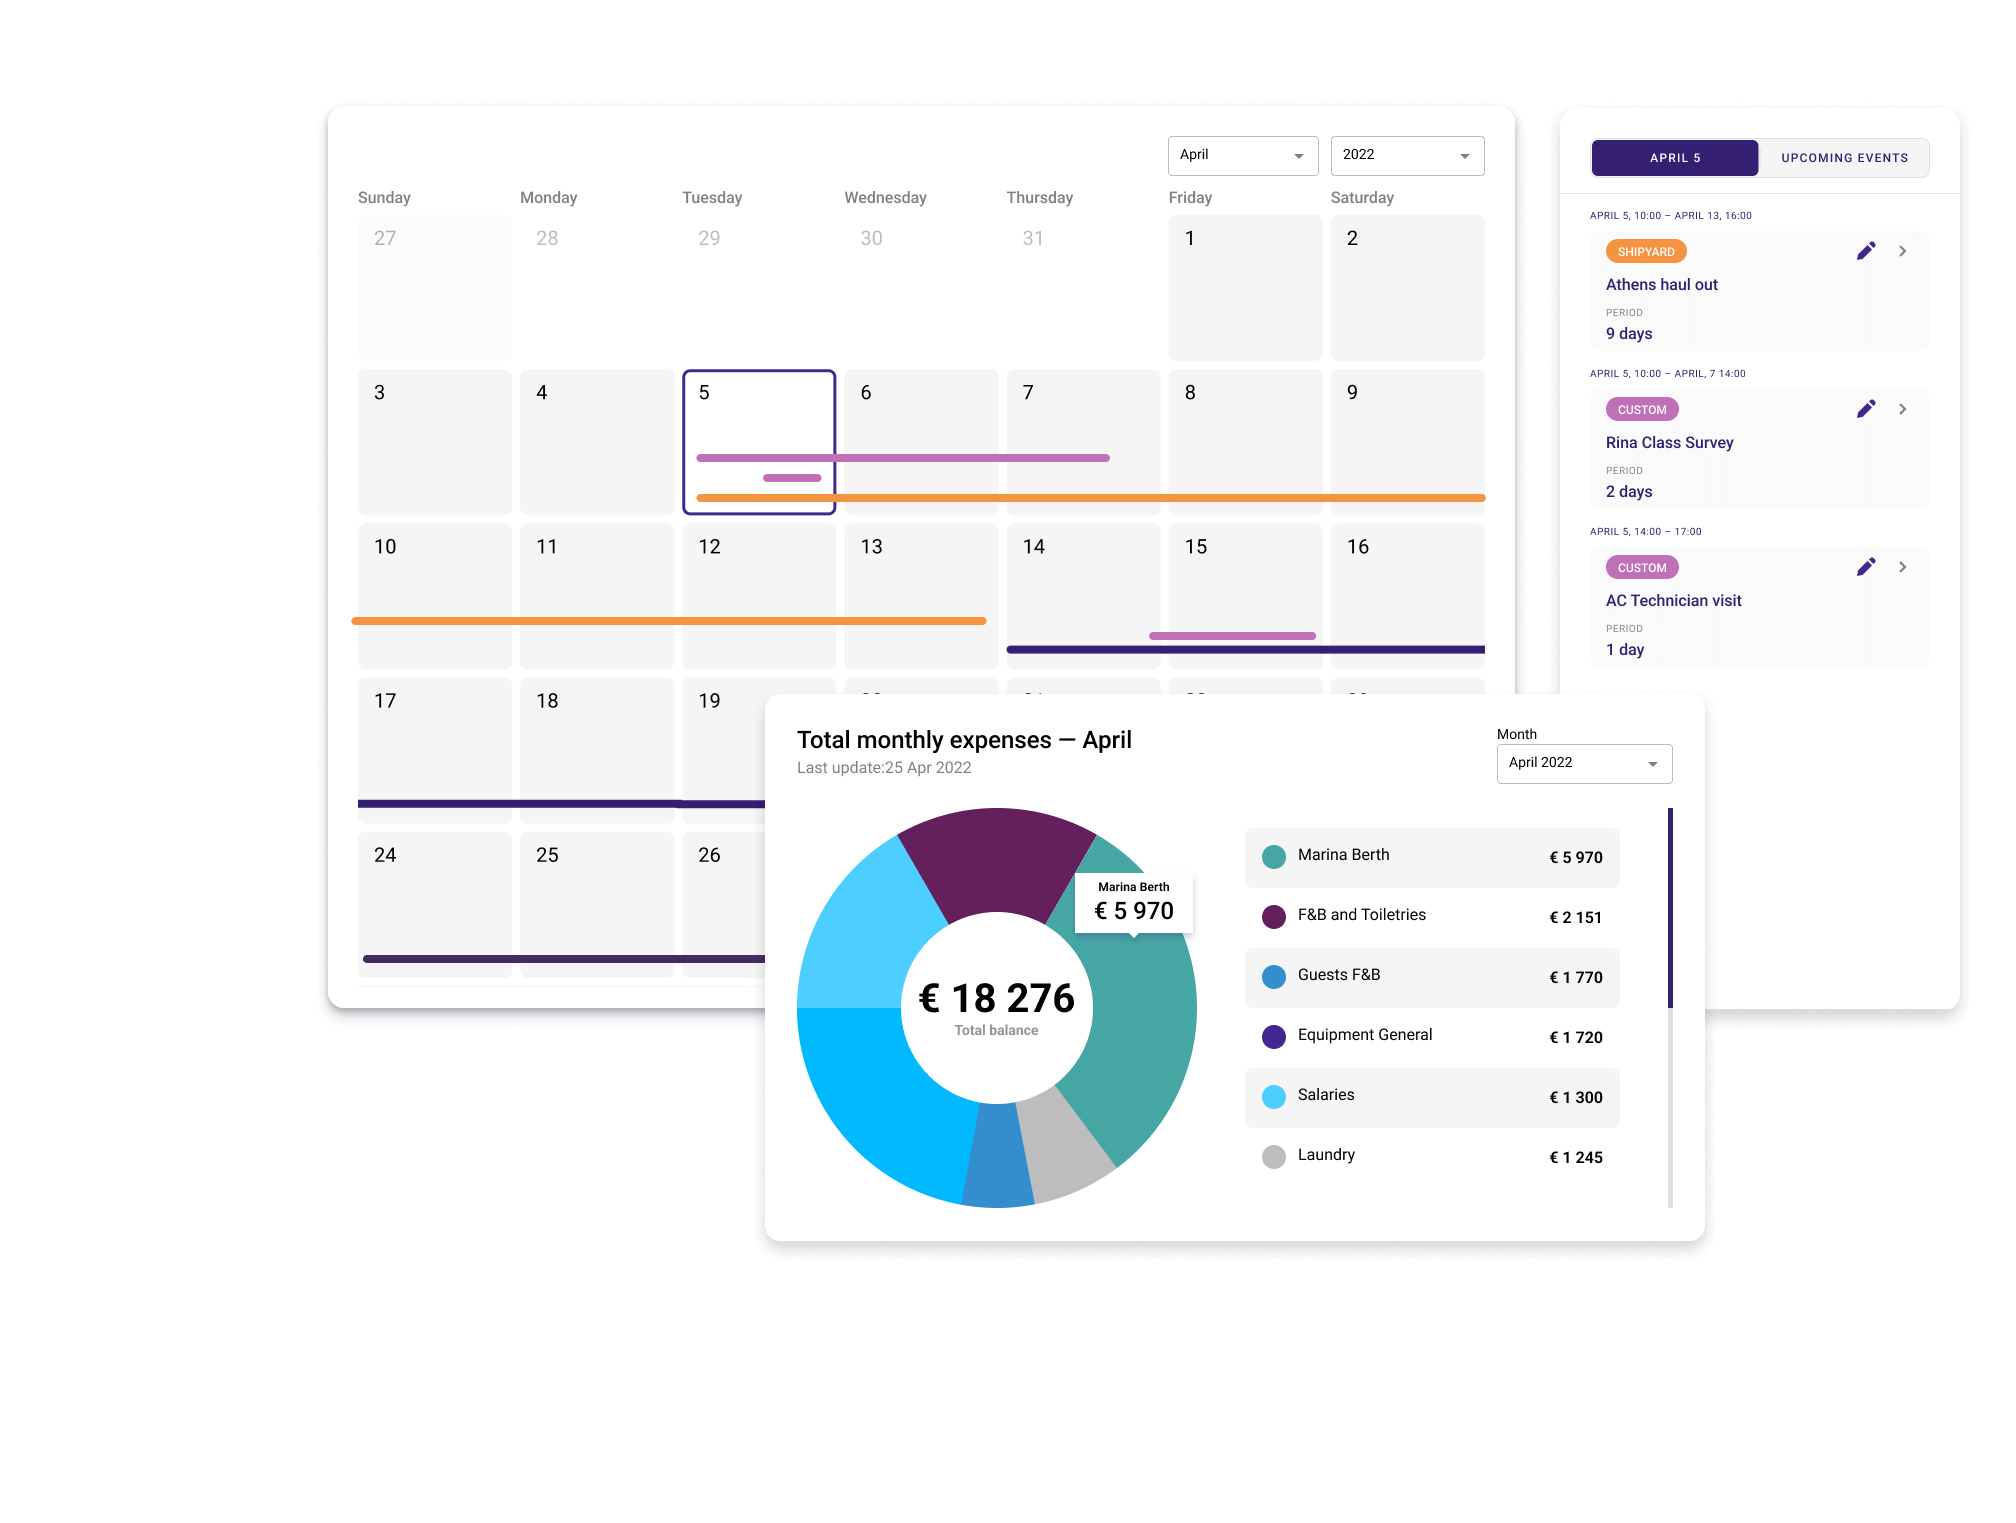 Seazone yacht management dashboard and events calendar